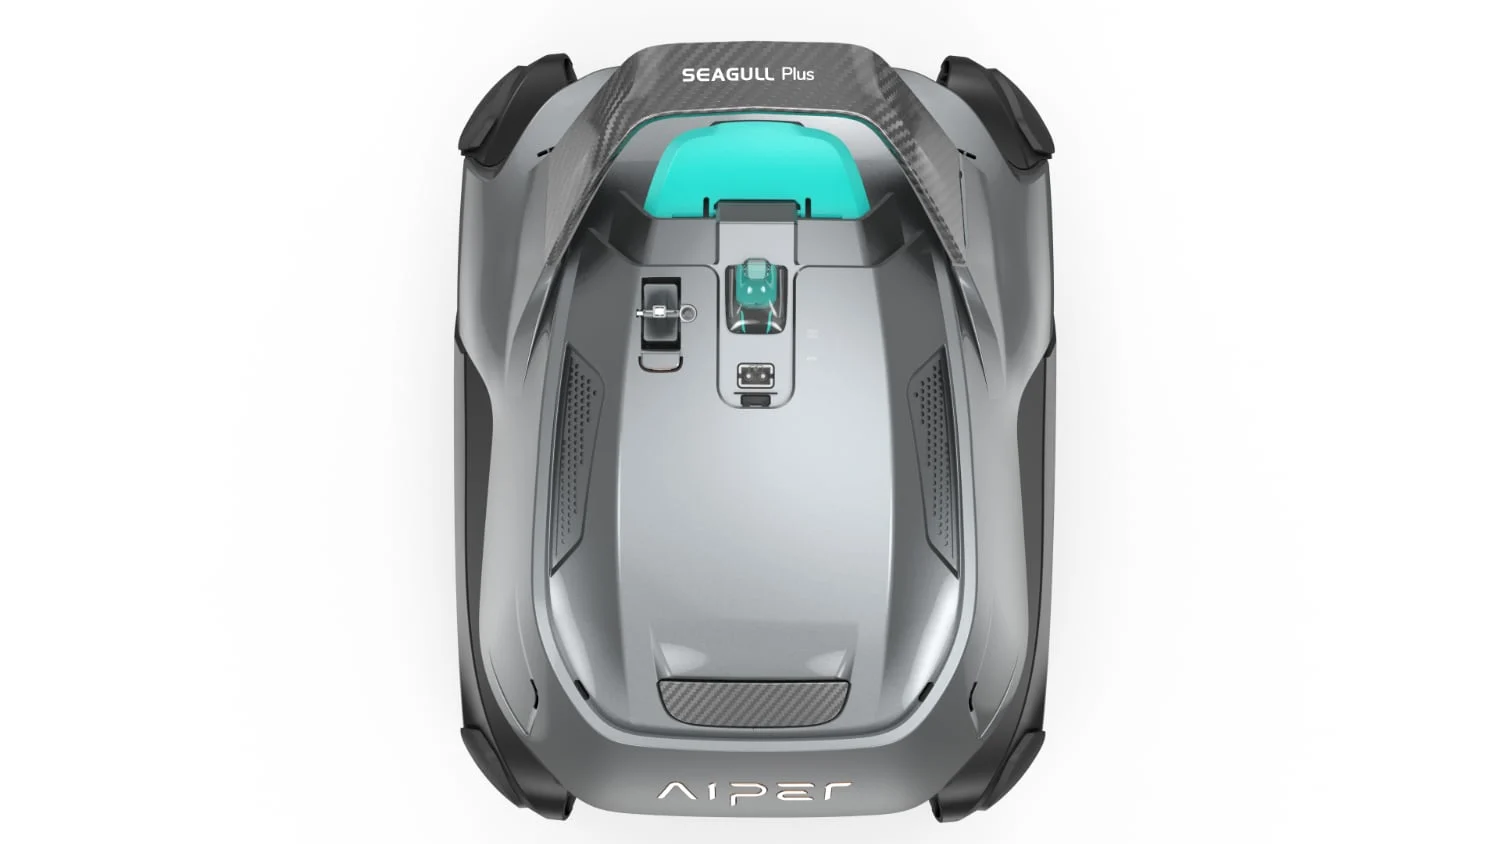 Aiper launches the Seagull Professional, a quad-motor pool cleaner